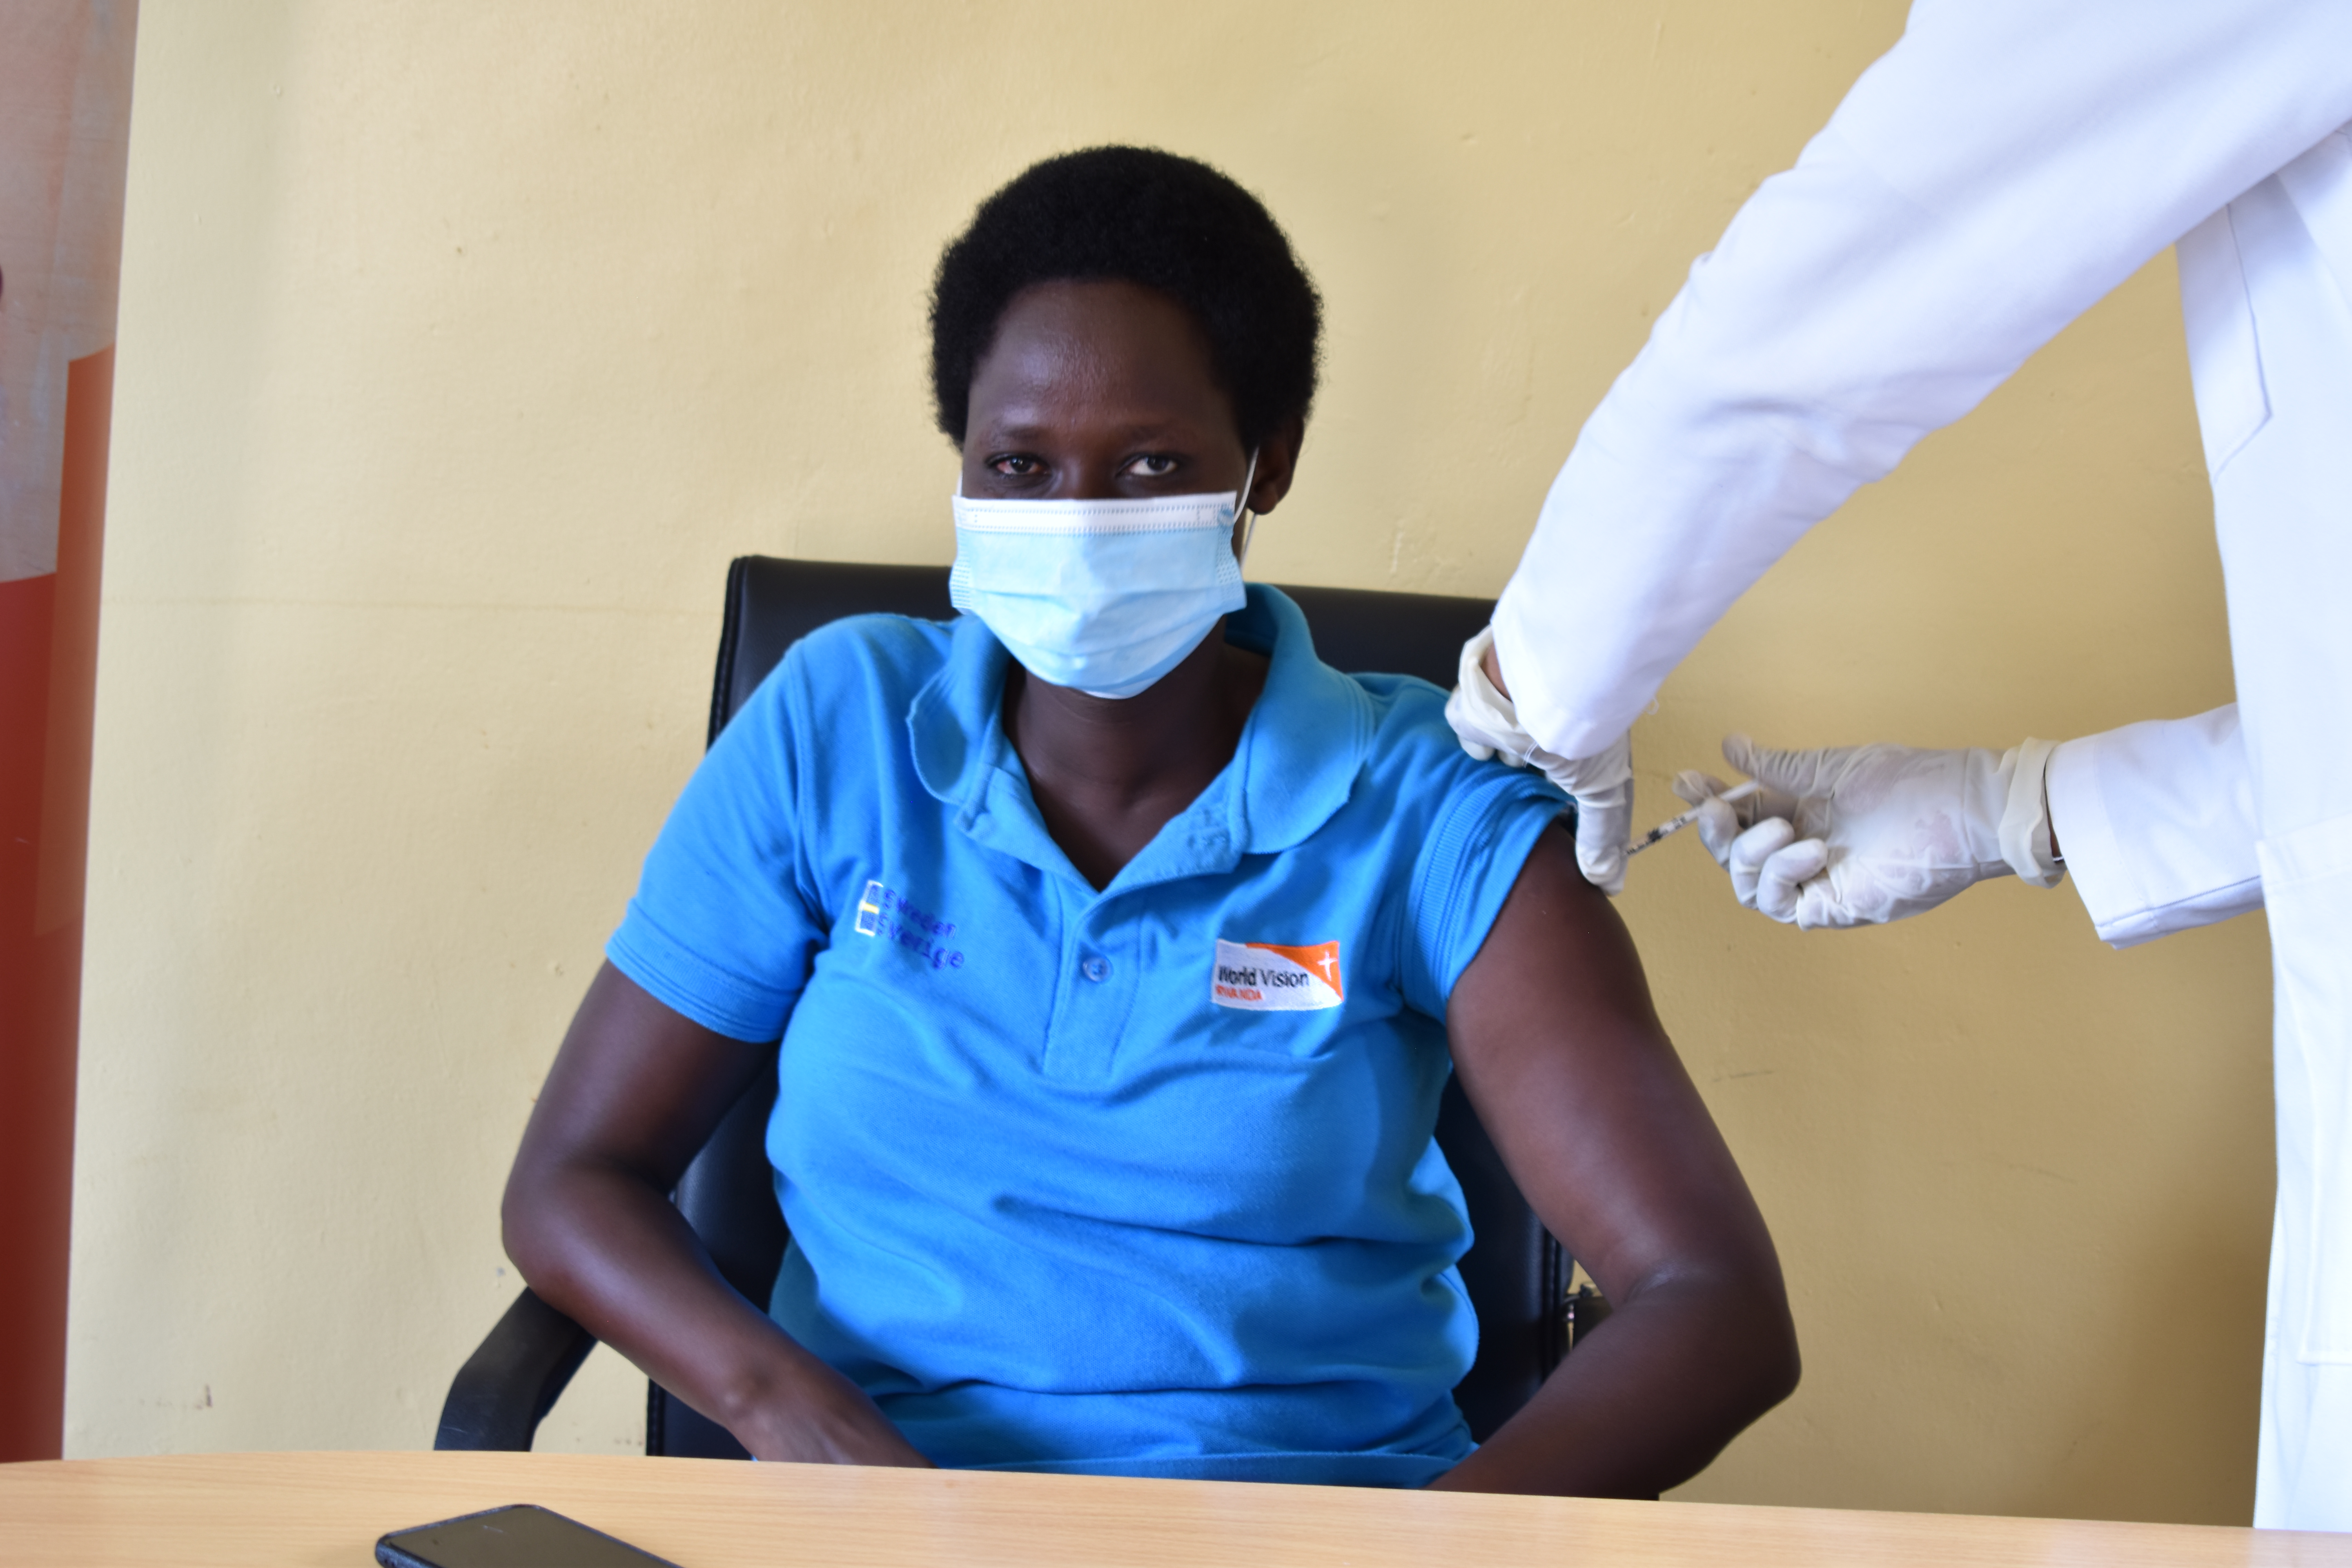 One of the frontline staff who received the vaccine